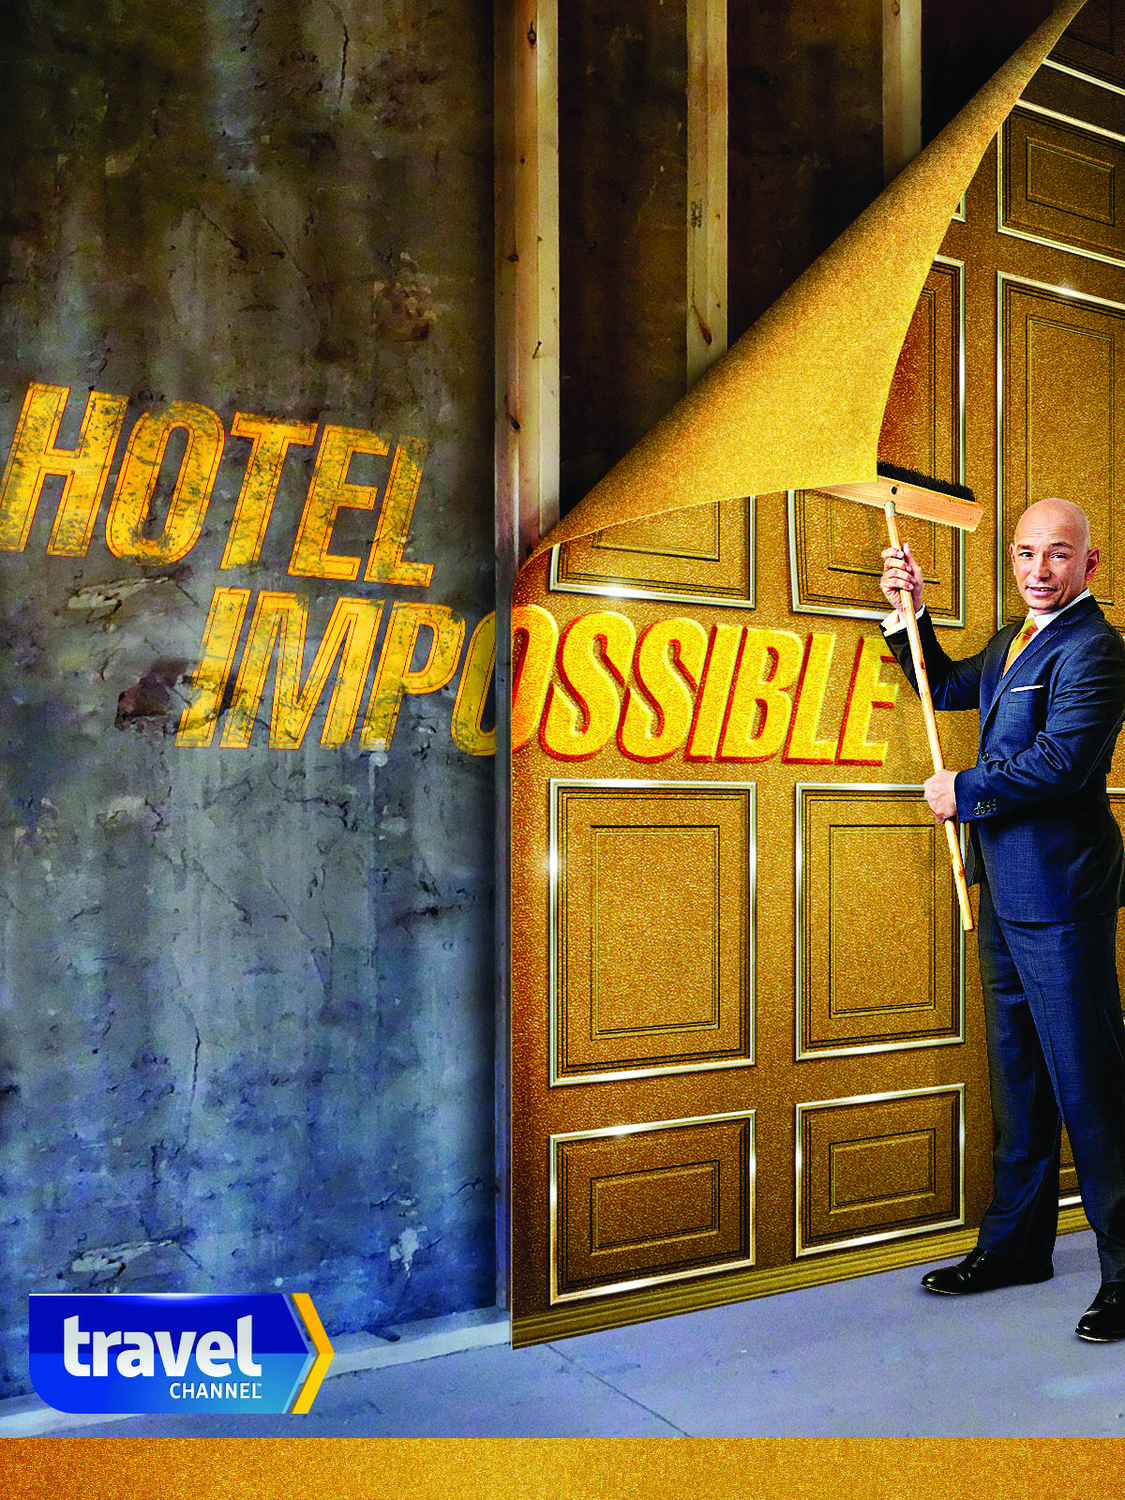 Extra Large TV Poster Image for Hotel Impossible (#6 of 6)